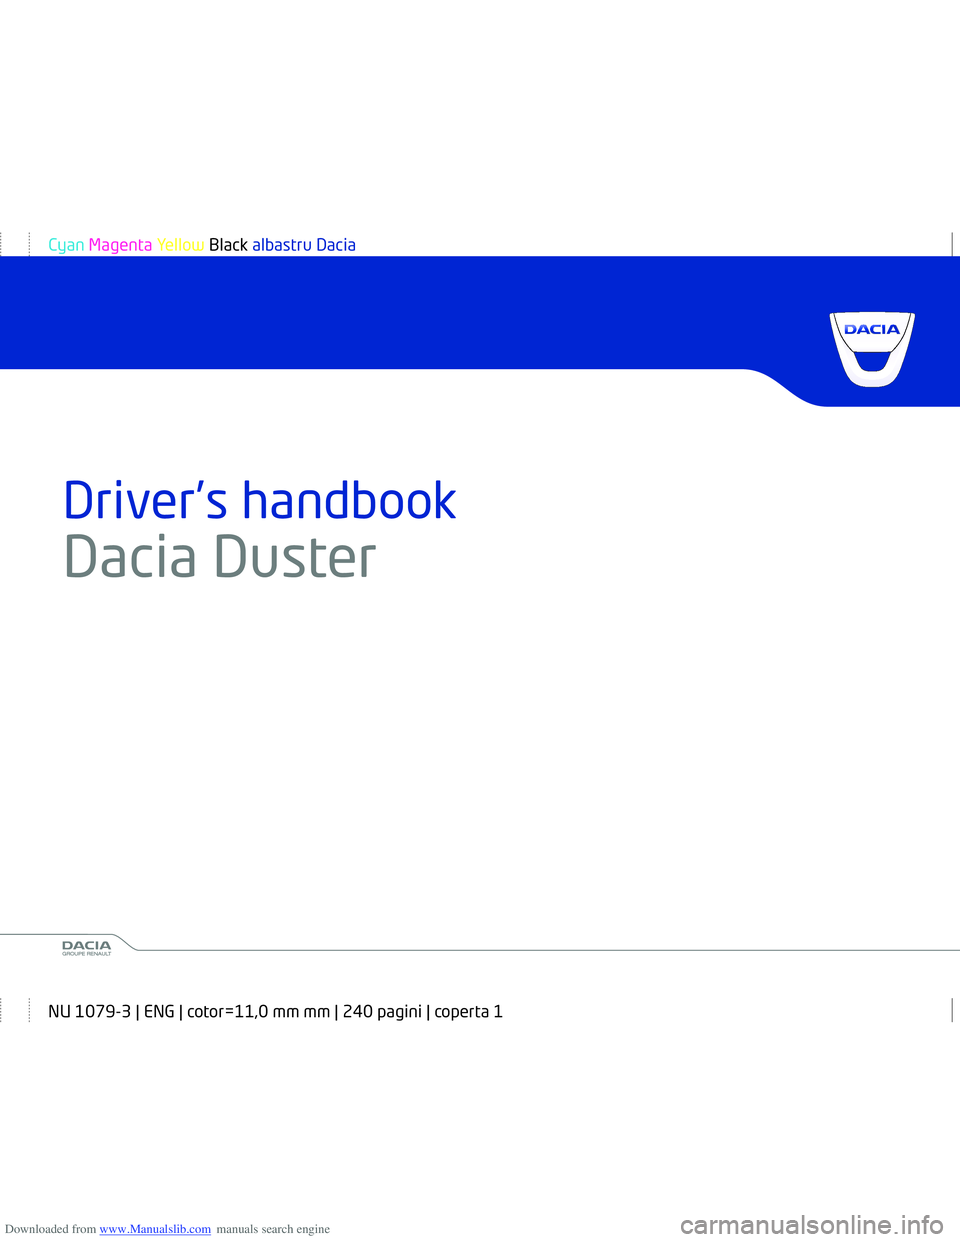 DACIA DUSTER 2013  Owners Manual Downloaded from www.Manualslib.com manuals search engine www.daciagroup.com
Driver’s handbook
Dacia  Duster        
Ref 999101781R / édition anglaiseNU 1079-3 - 07/2014
Cyan Magenta Yellow Black al